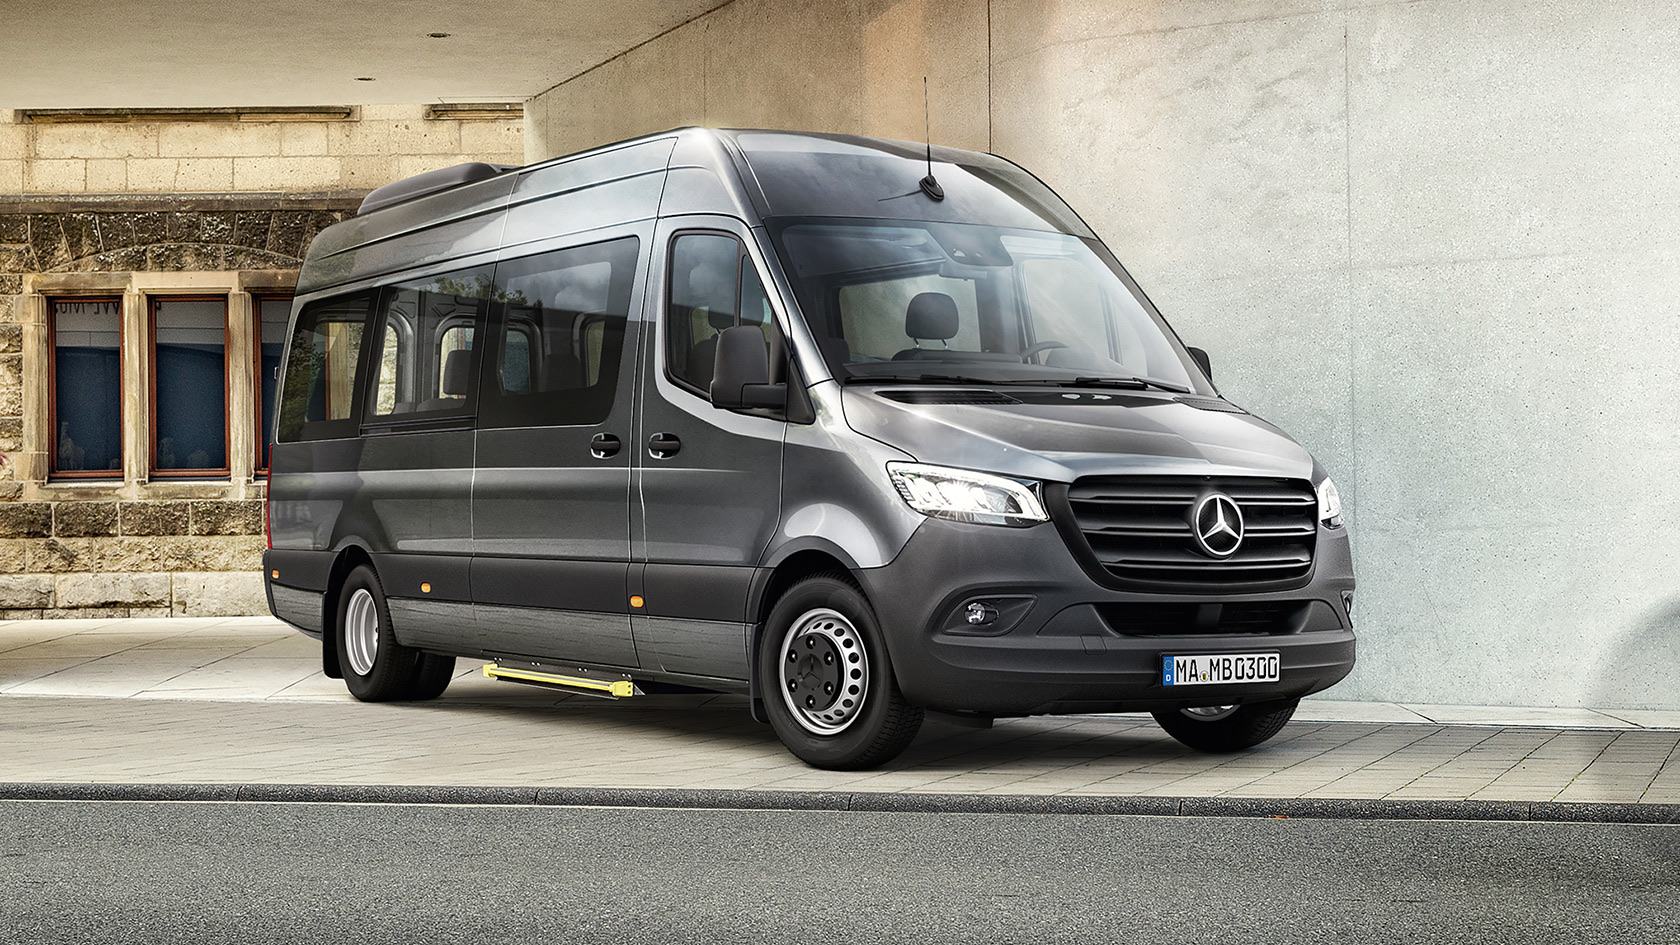 The Essential Guide to Minibus Hire for Special Events: What You Need to Know